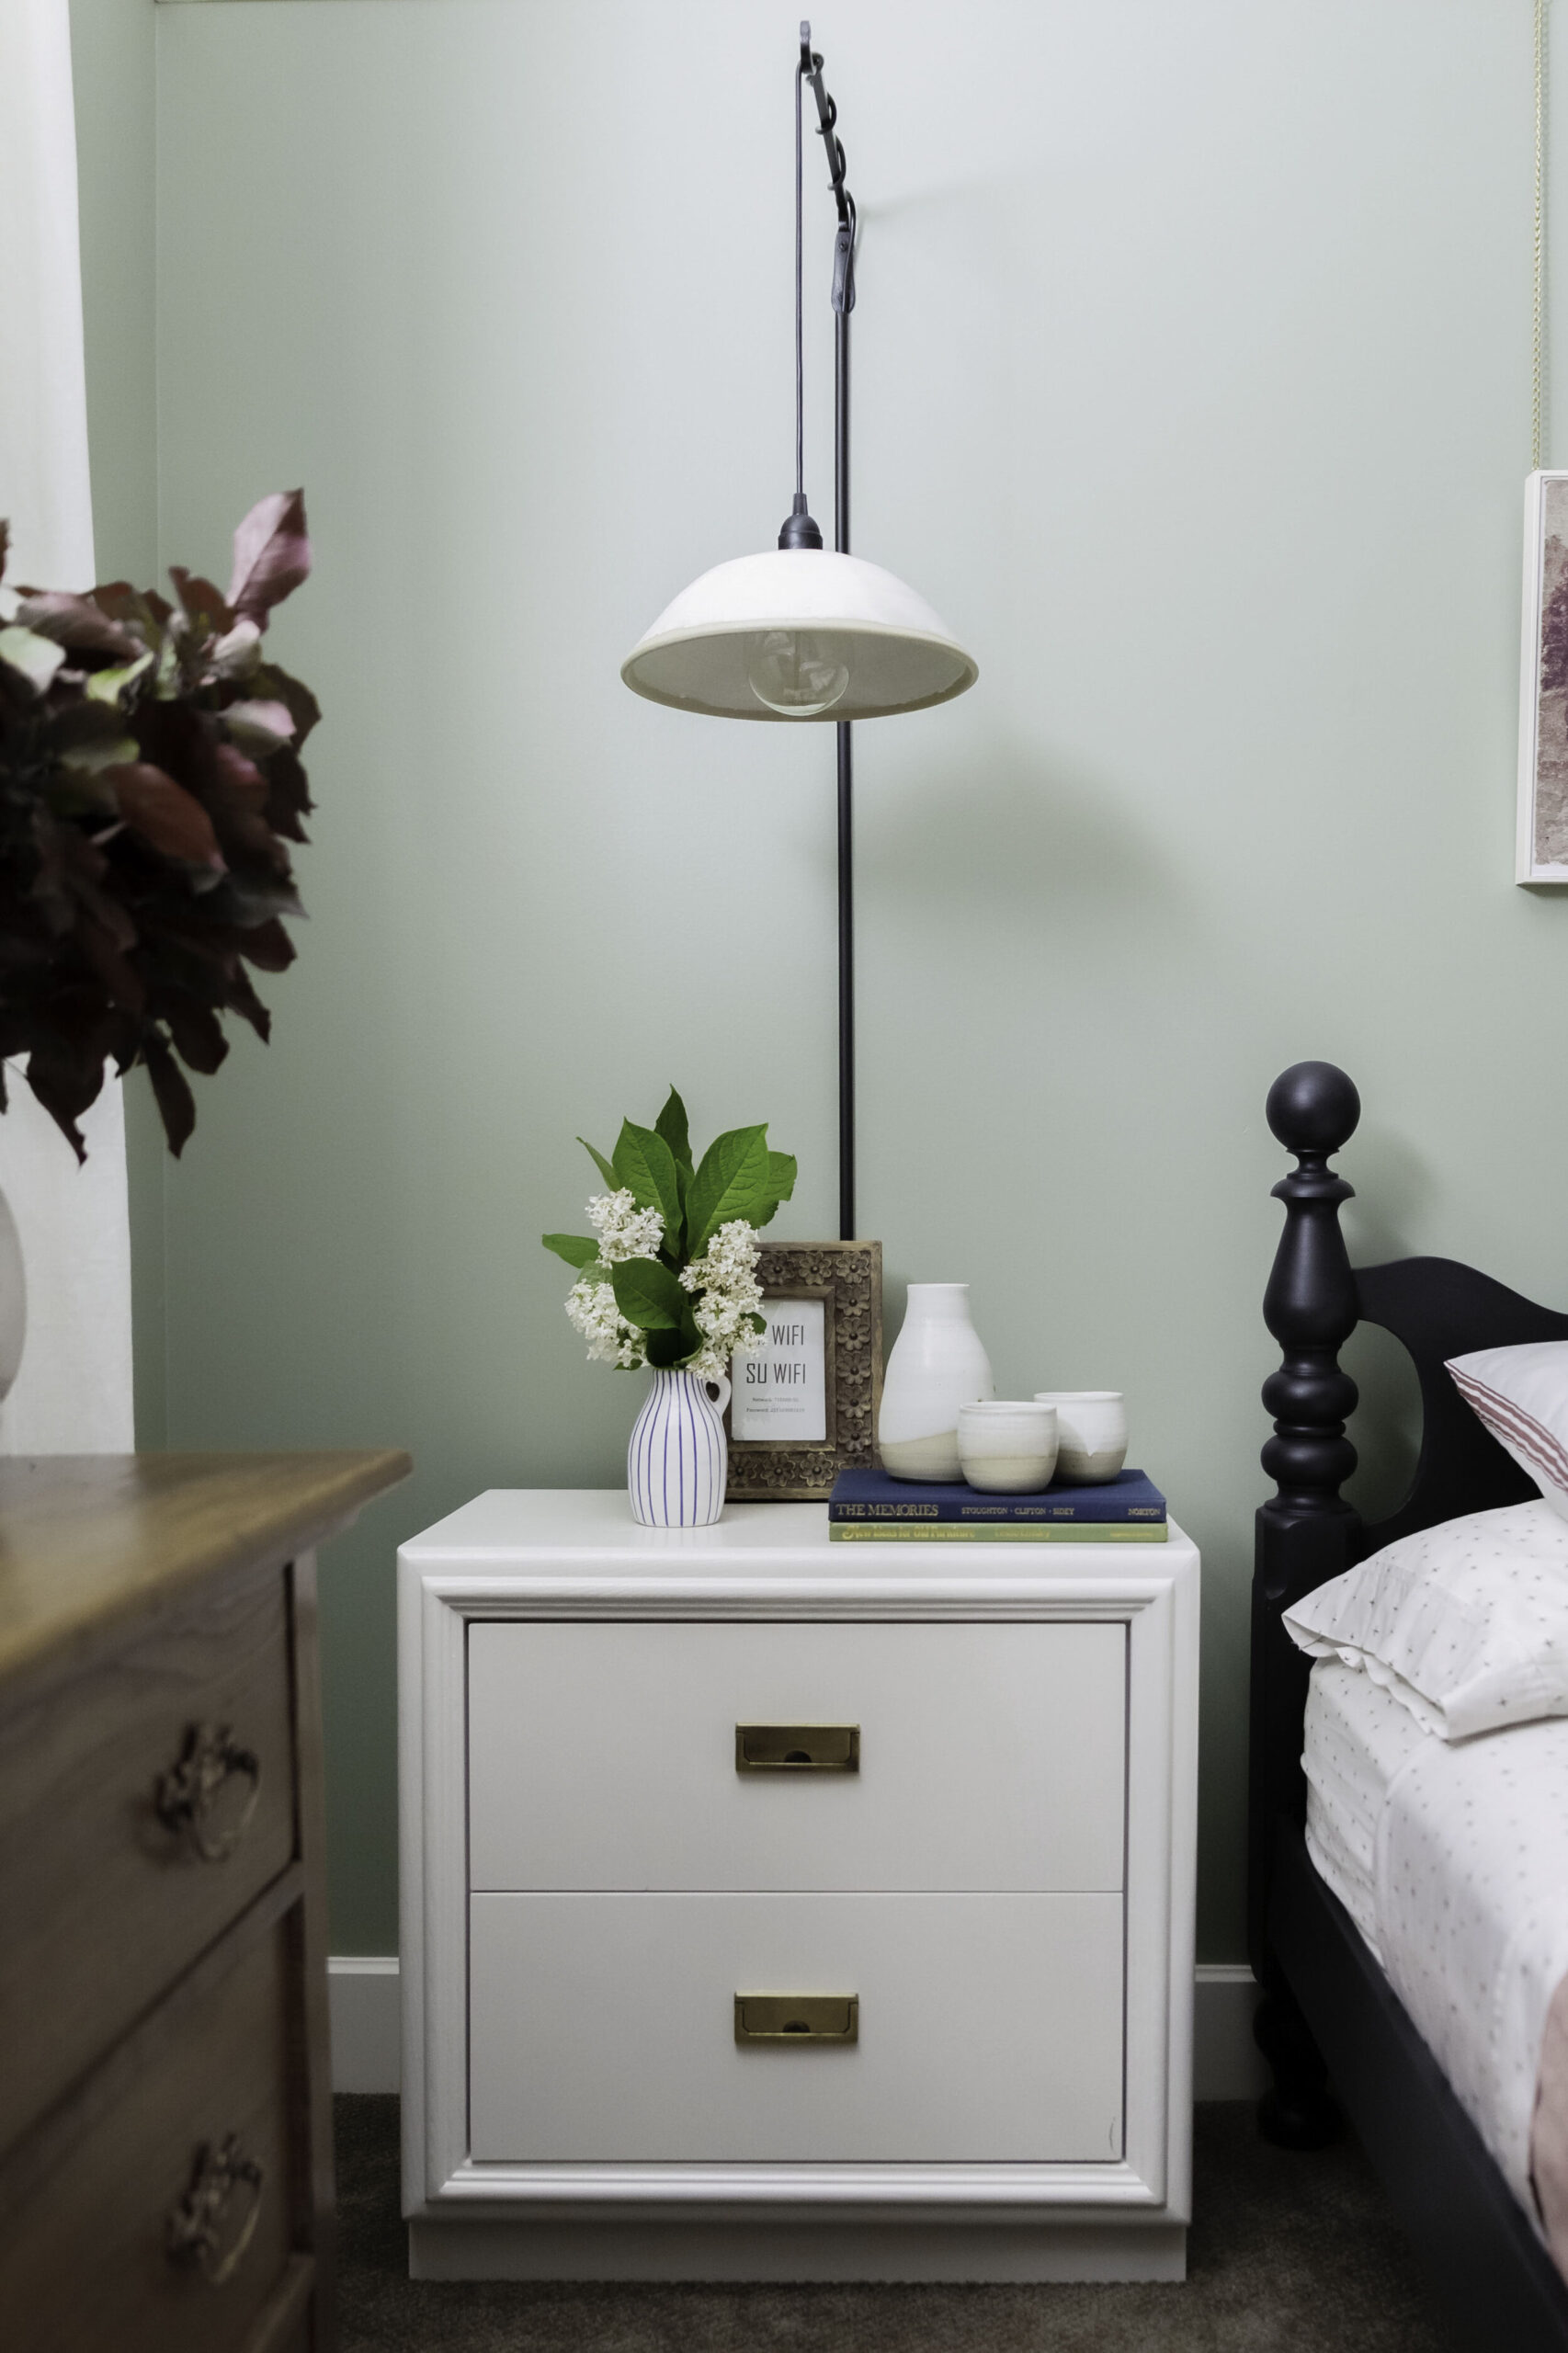 white modern nightstand with black spindle bed beside and with ceramic wall sconces hanging above, with flowers and books/cermaics styled on nightstand